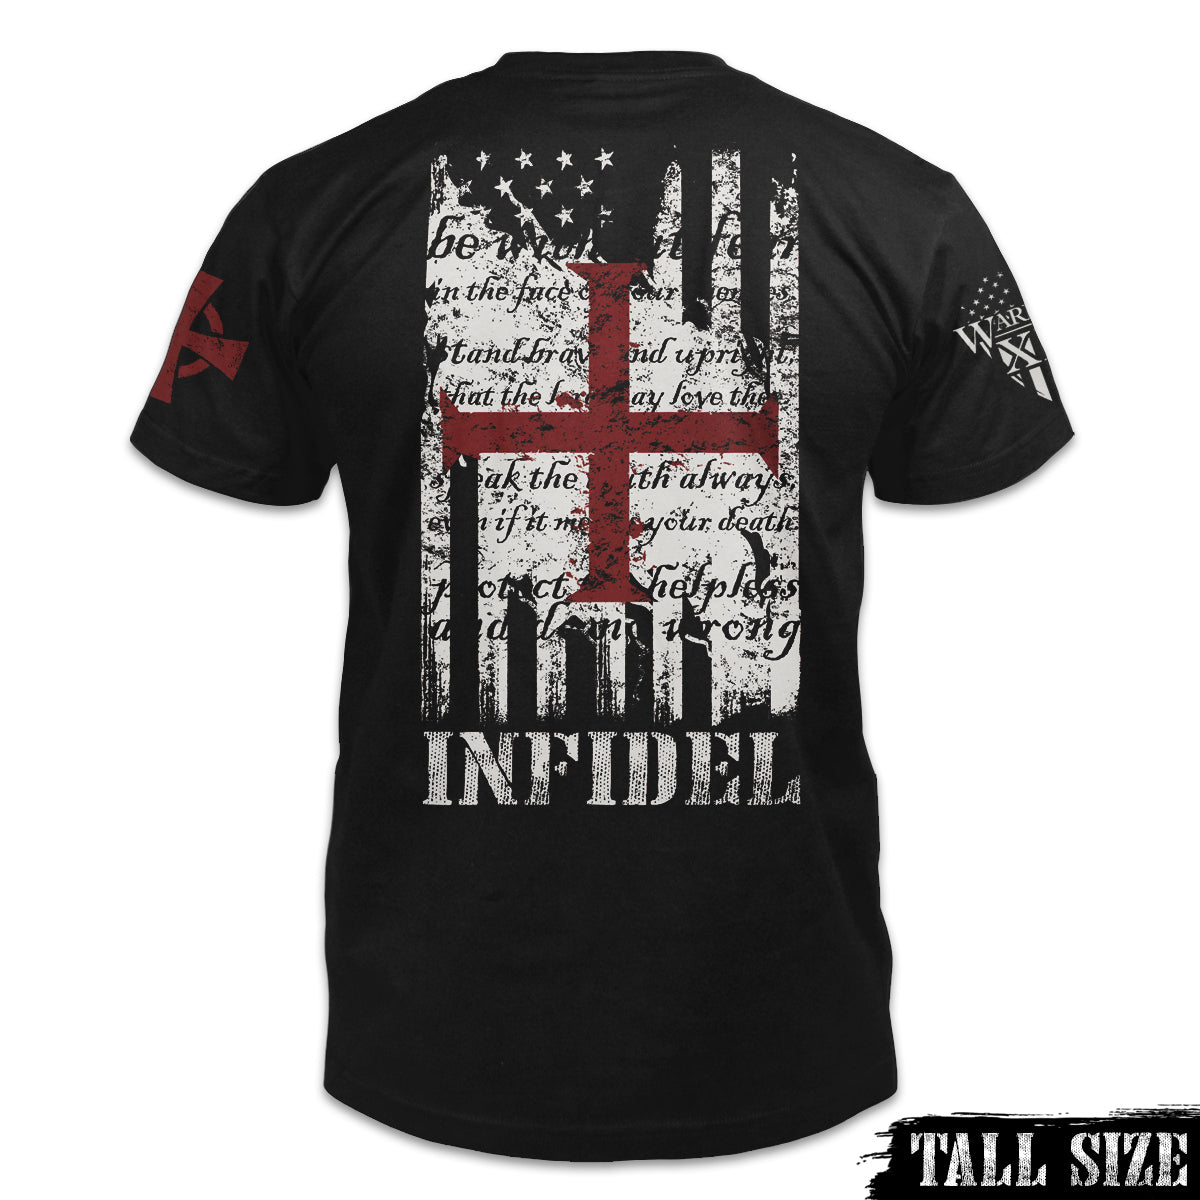 A black tall sized shirt with "the American and Templar flag" printed on the back of the shirt.